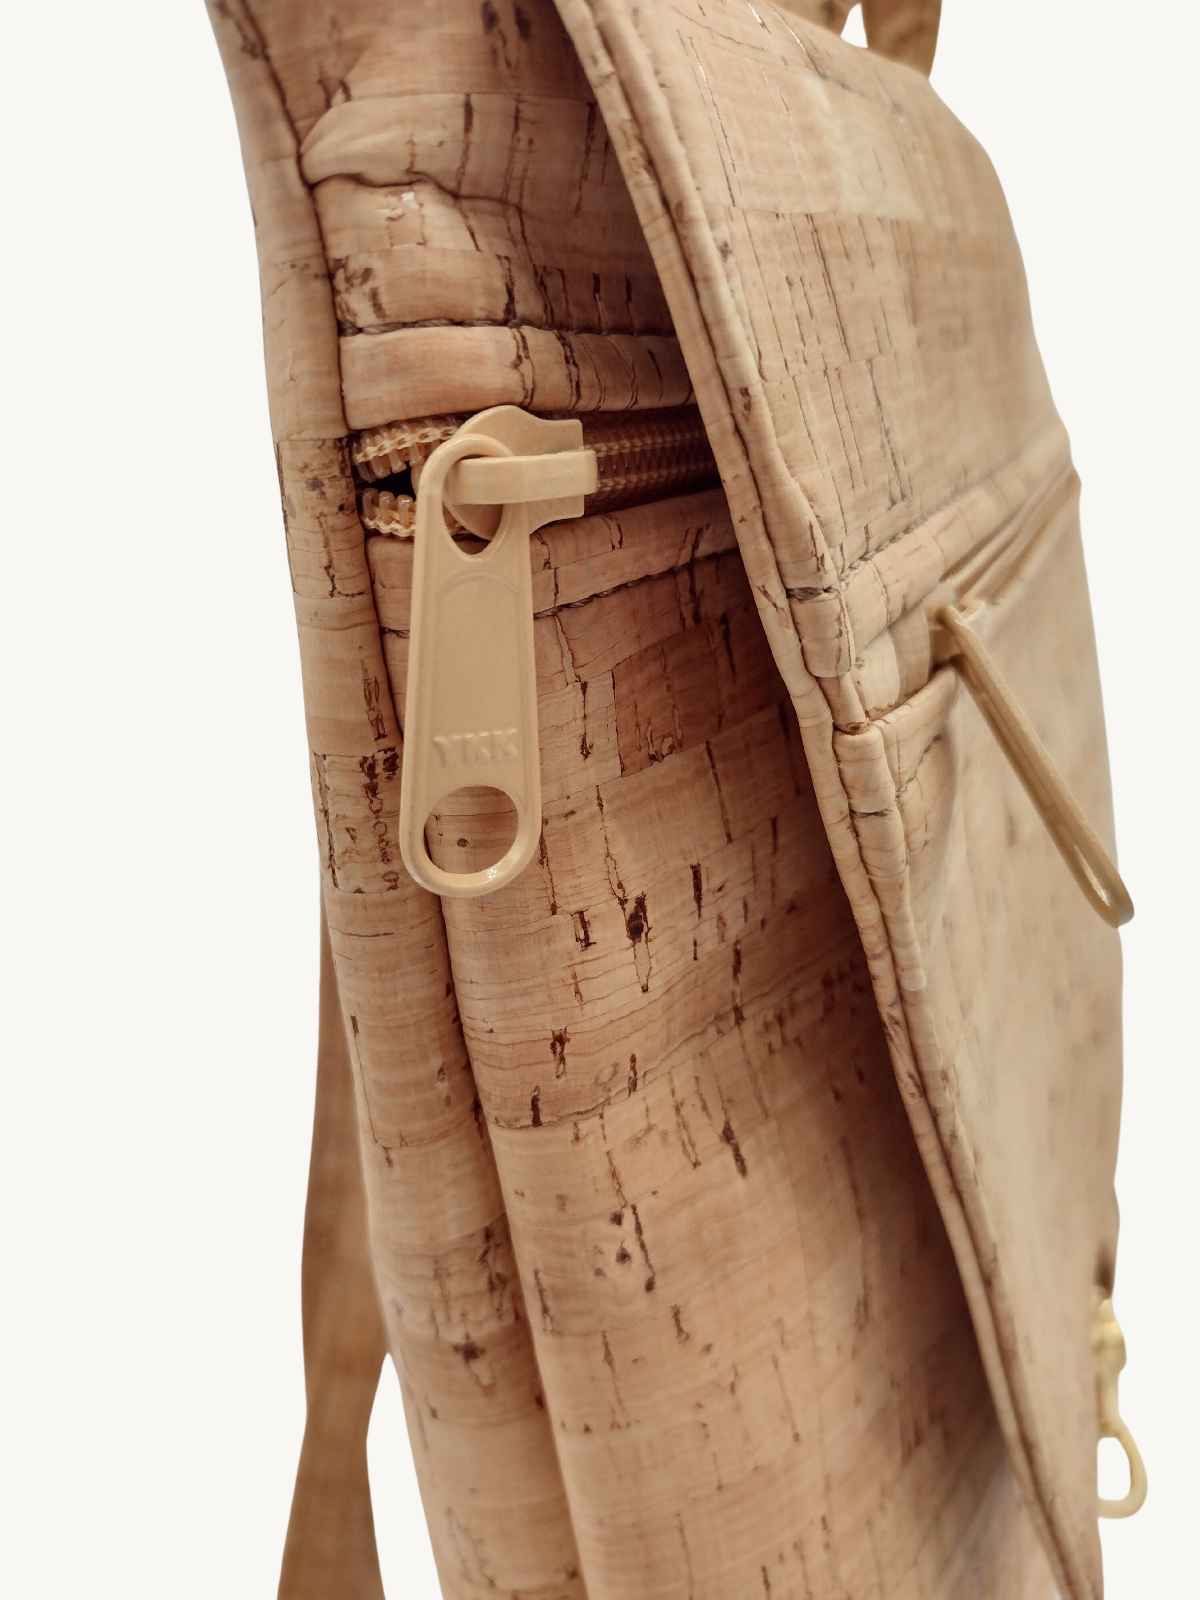 Cork leather cruelty free backpack very durable close up stitching